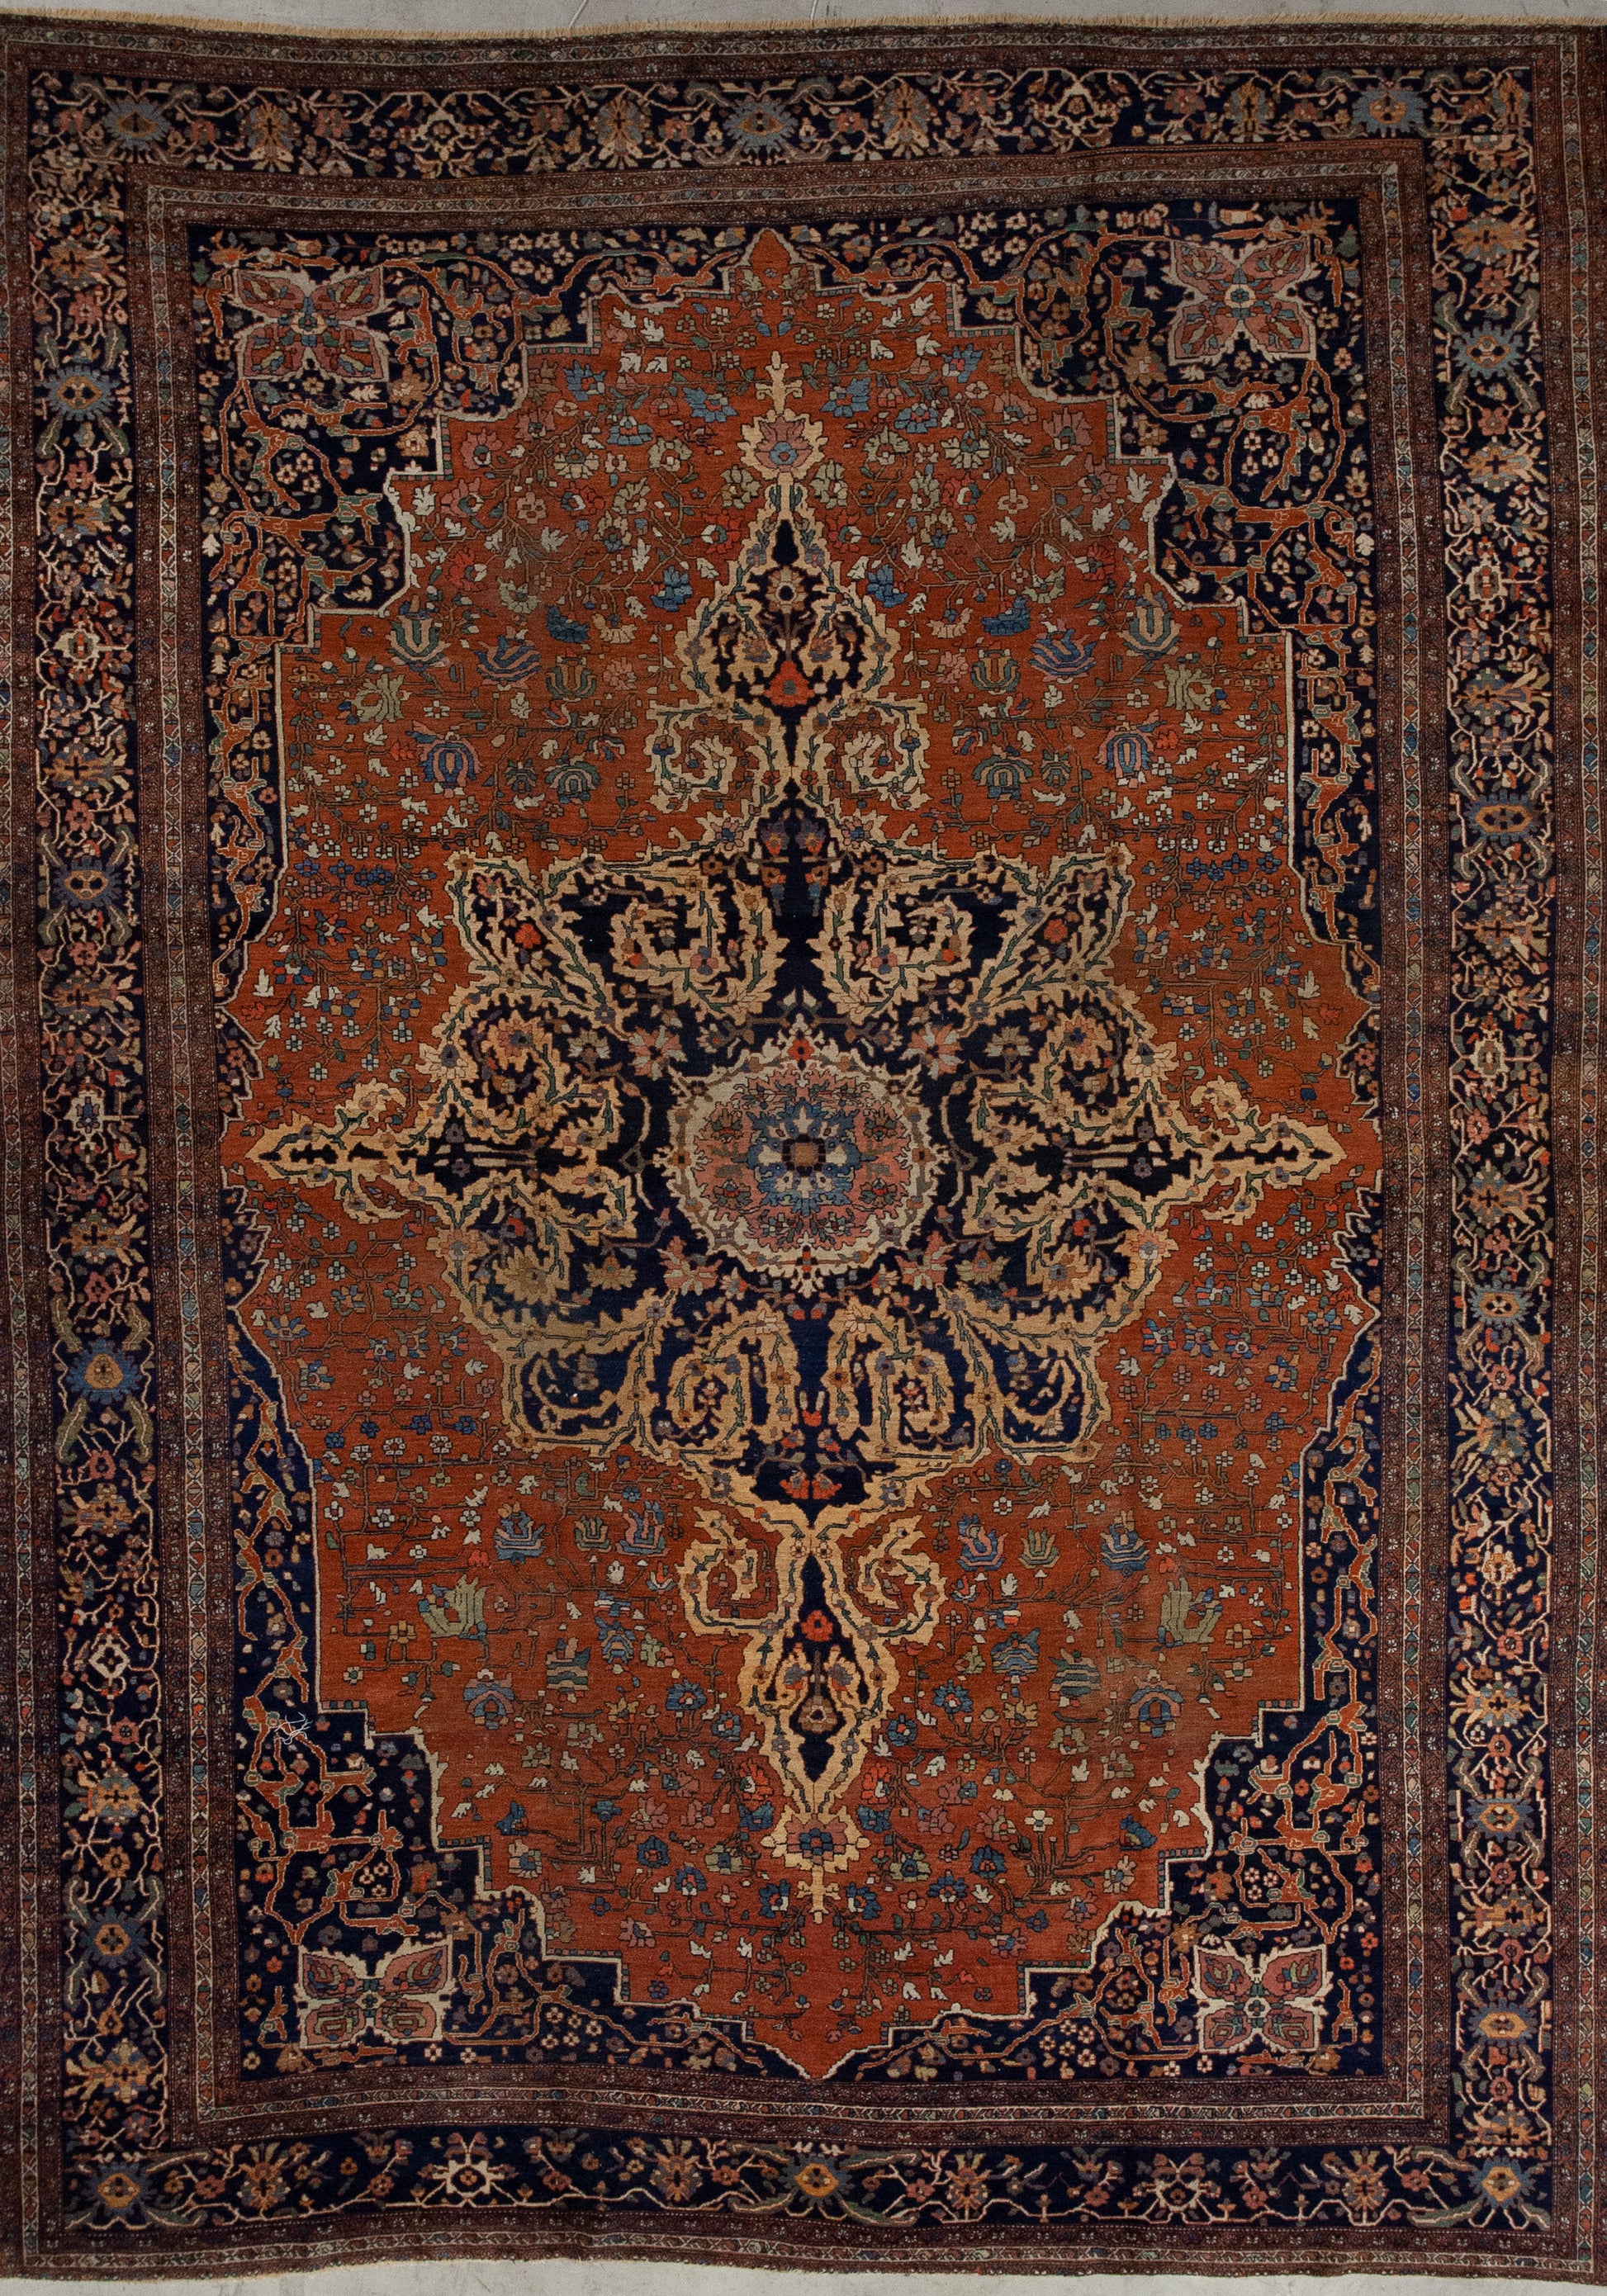 Farahan rug with color scheme comes in burgundy, dark brown, and royal blue.